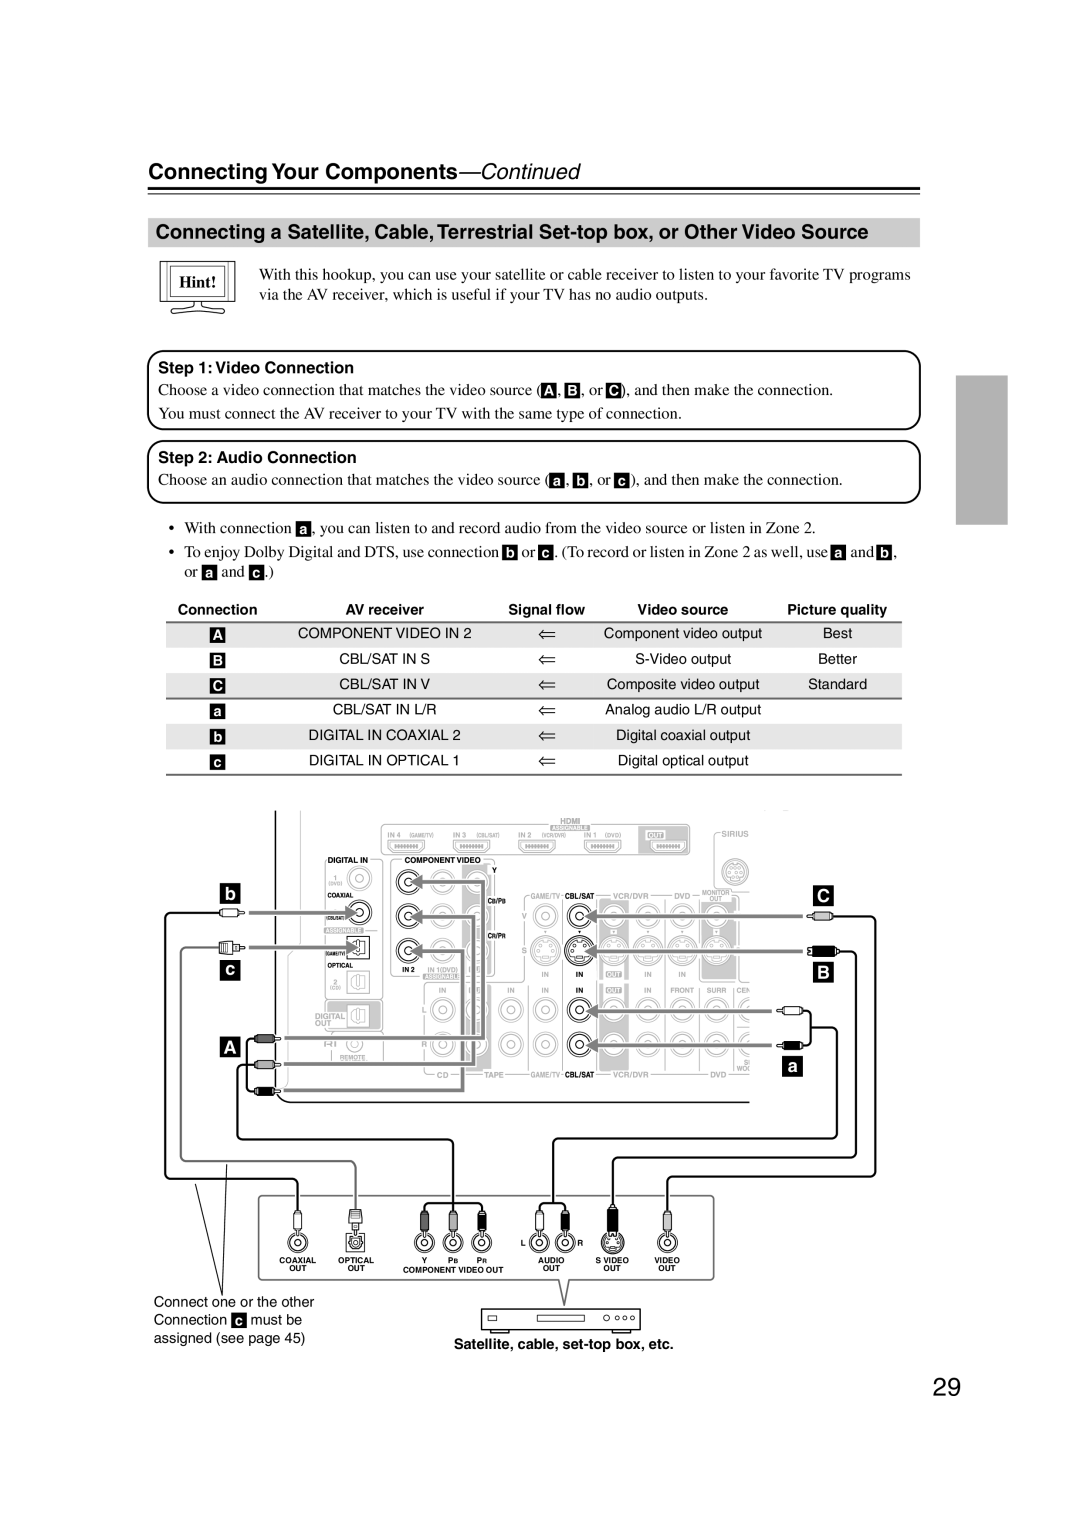 Integra DTR-5.9 instruction manual Connecting Your Components—Continued, Hint 